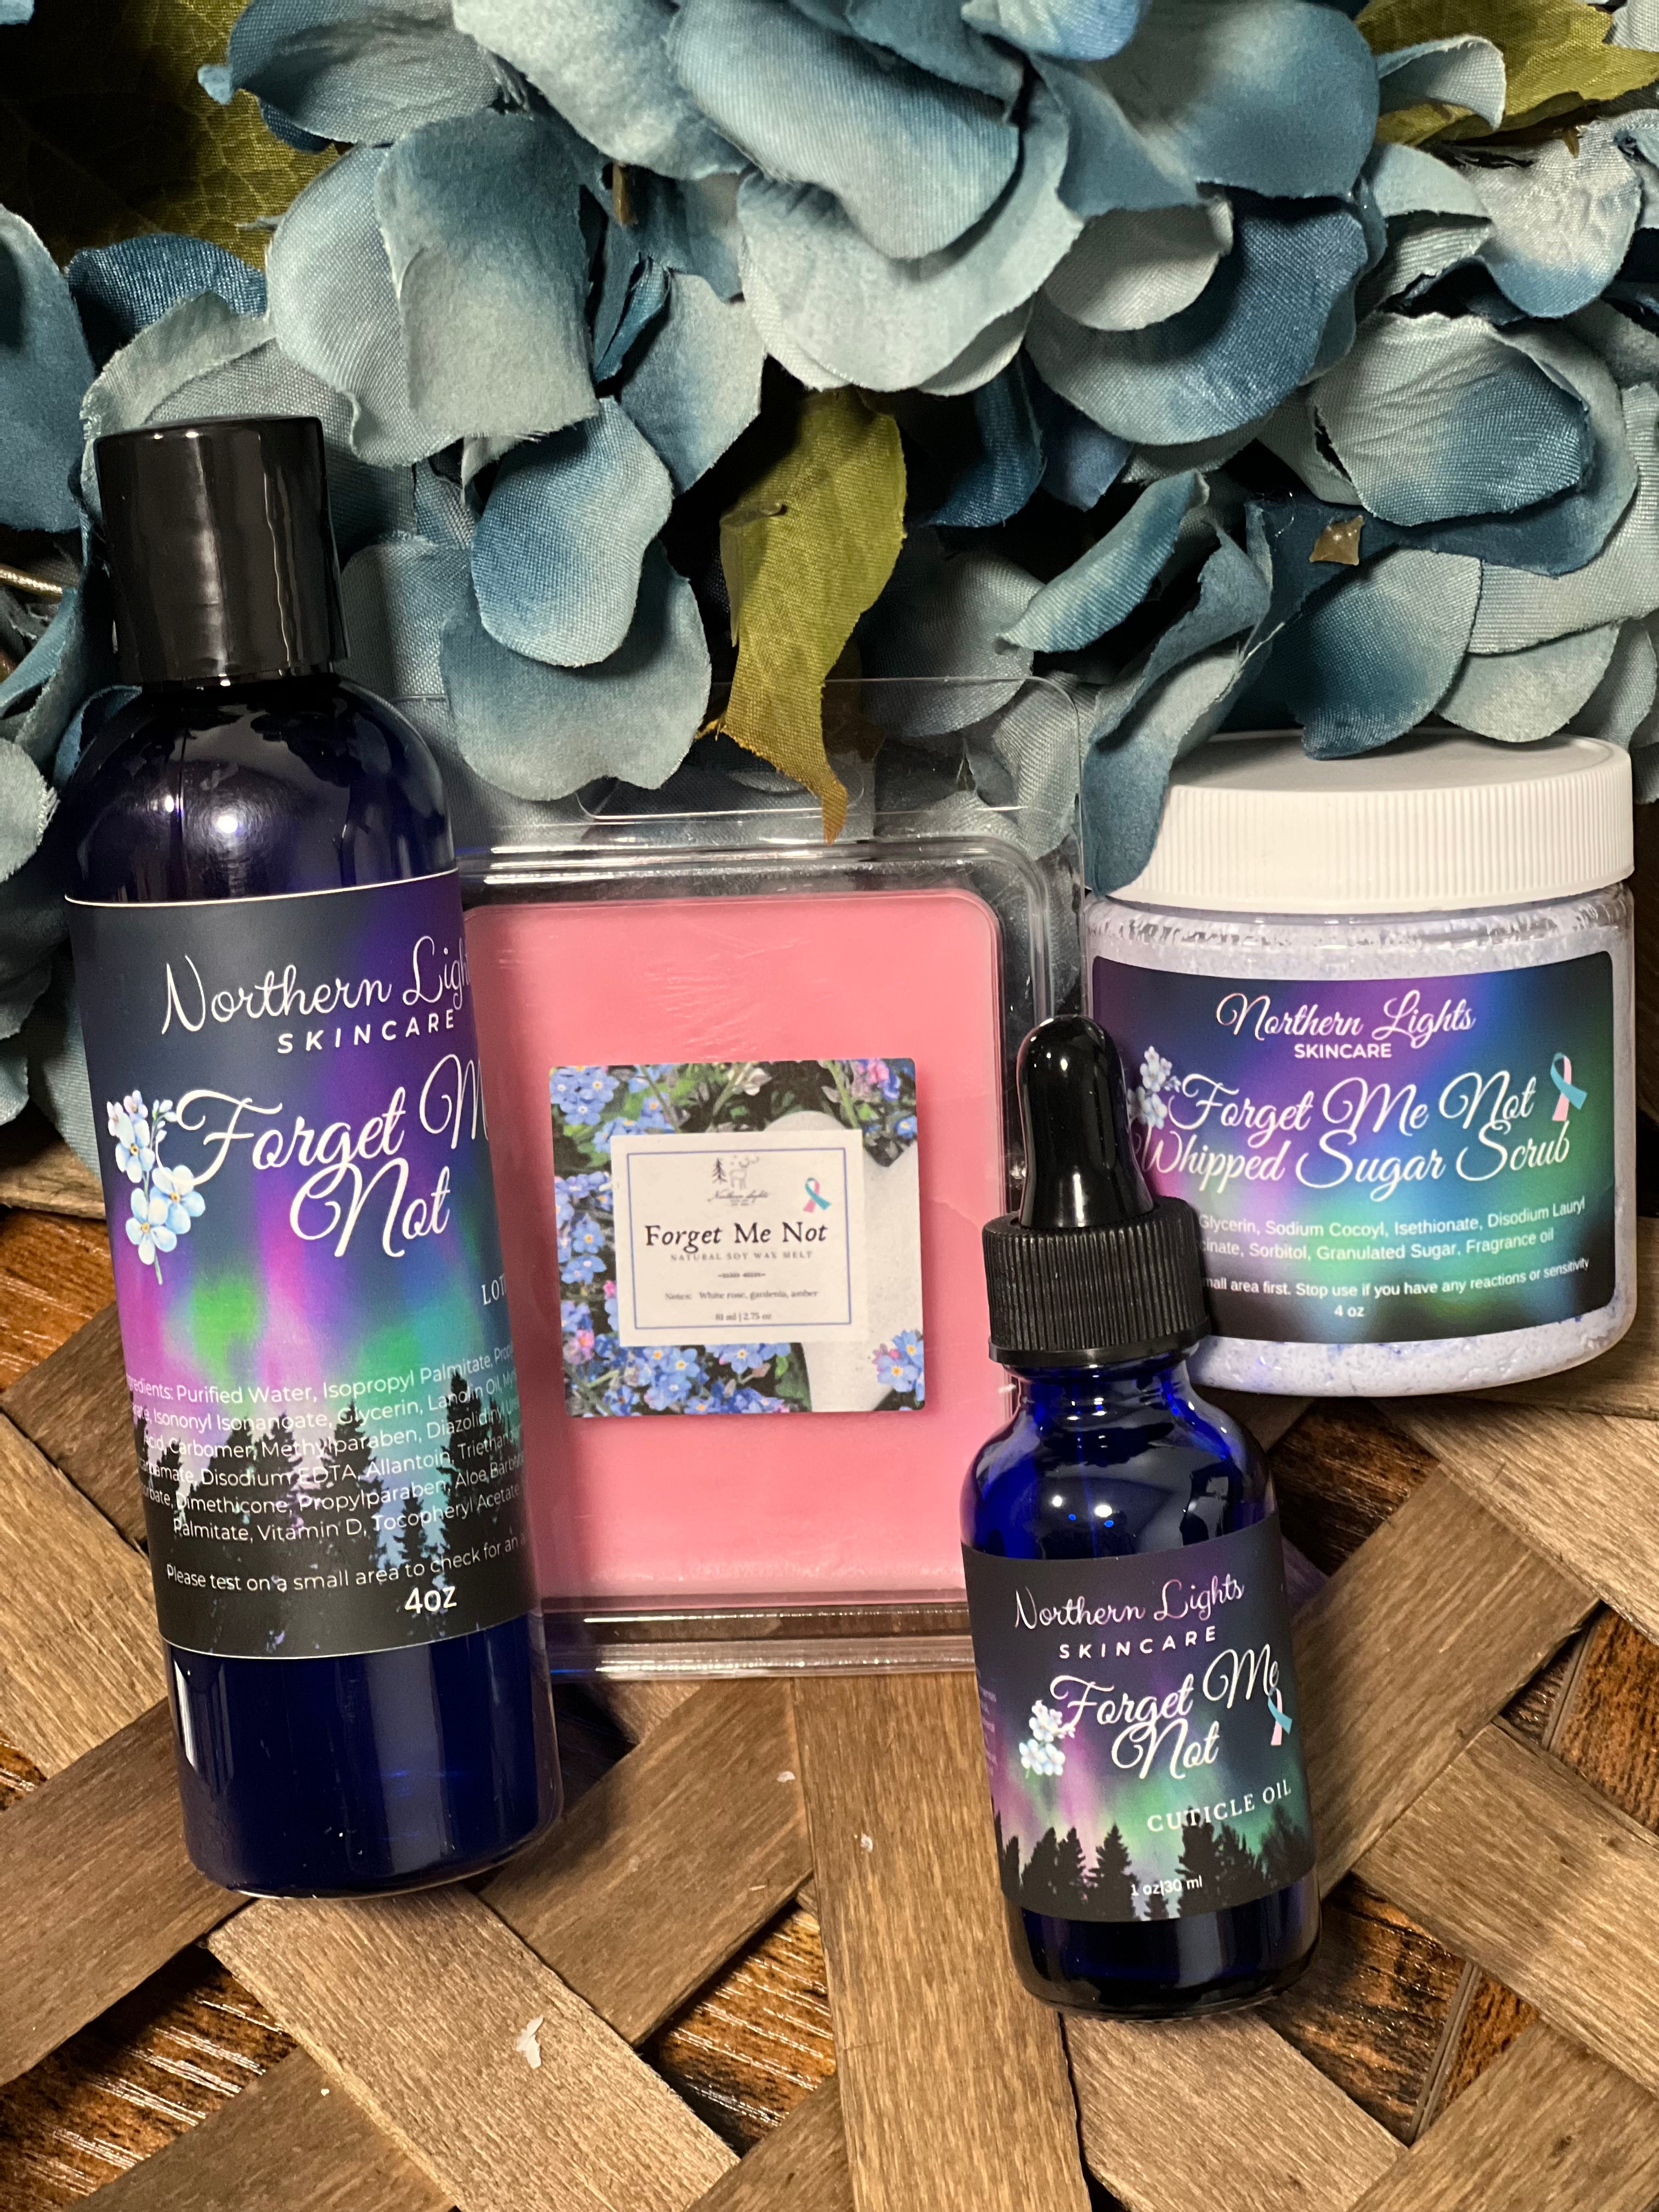 One Minute at a Time Bundle (forget me not dropper, lotion, wax melt, scrub)